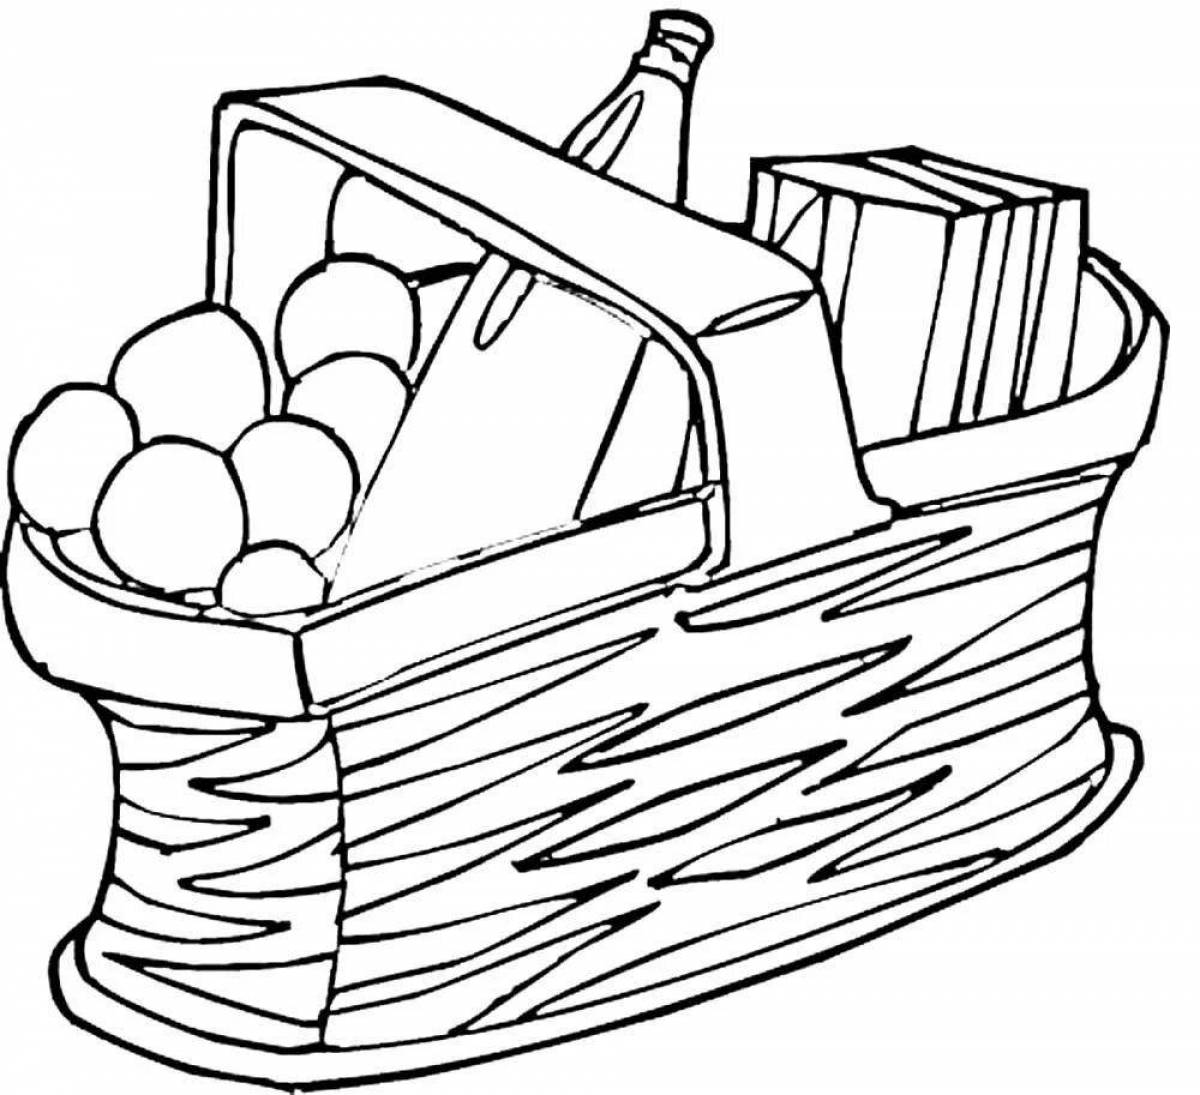 Adorable grocery cart coloring book